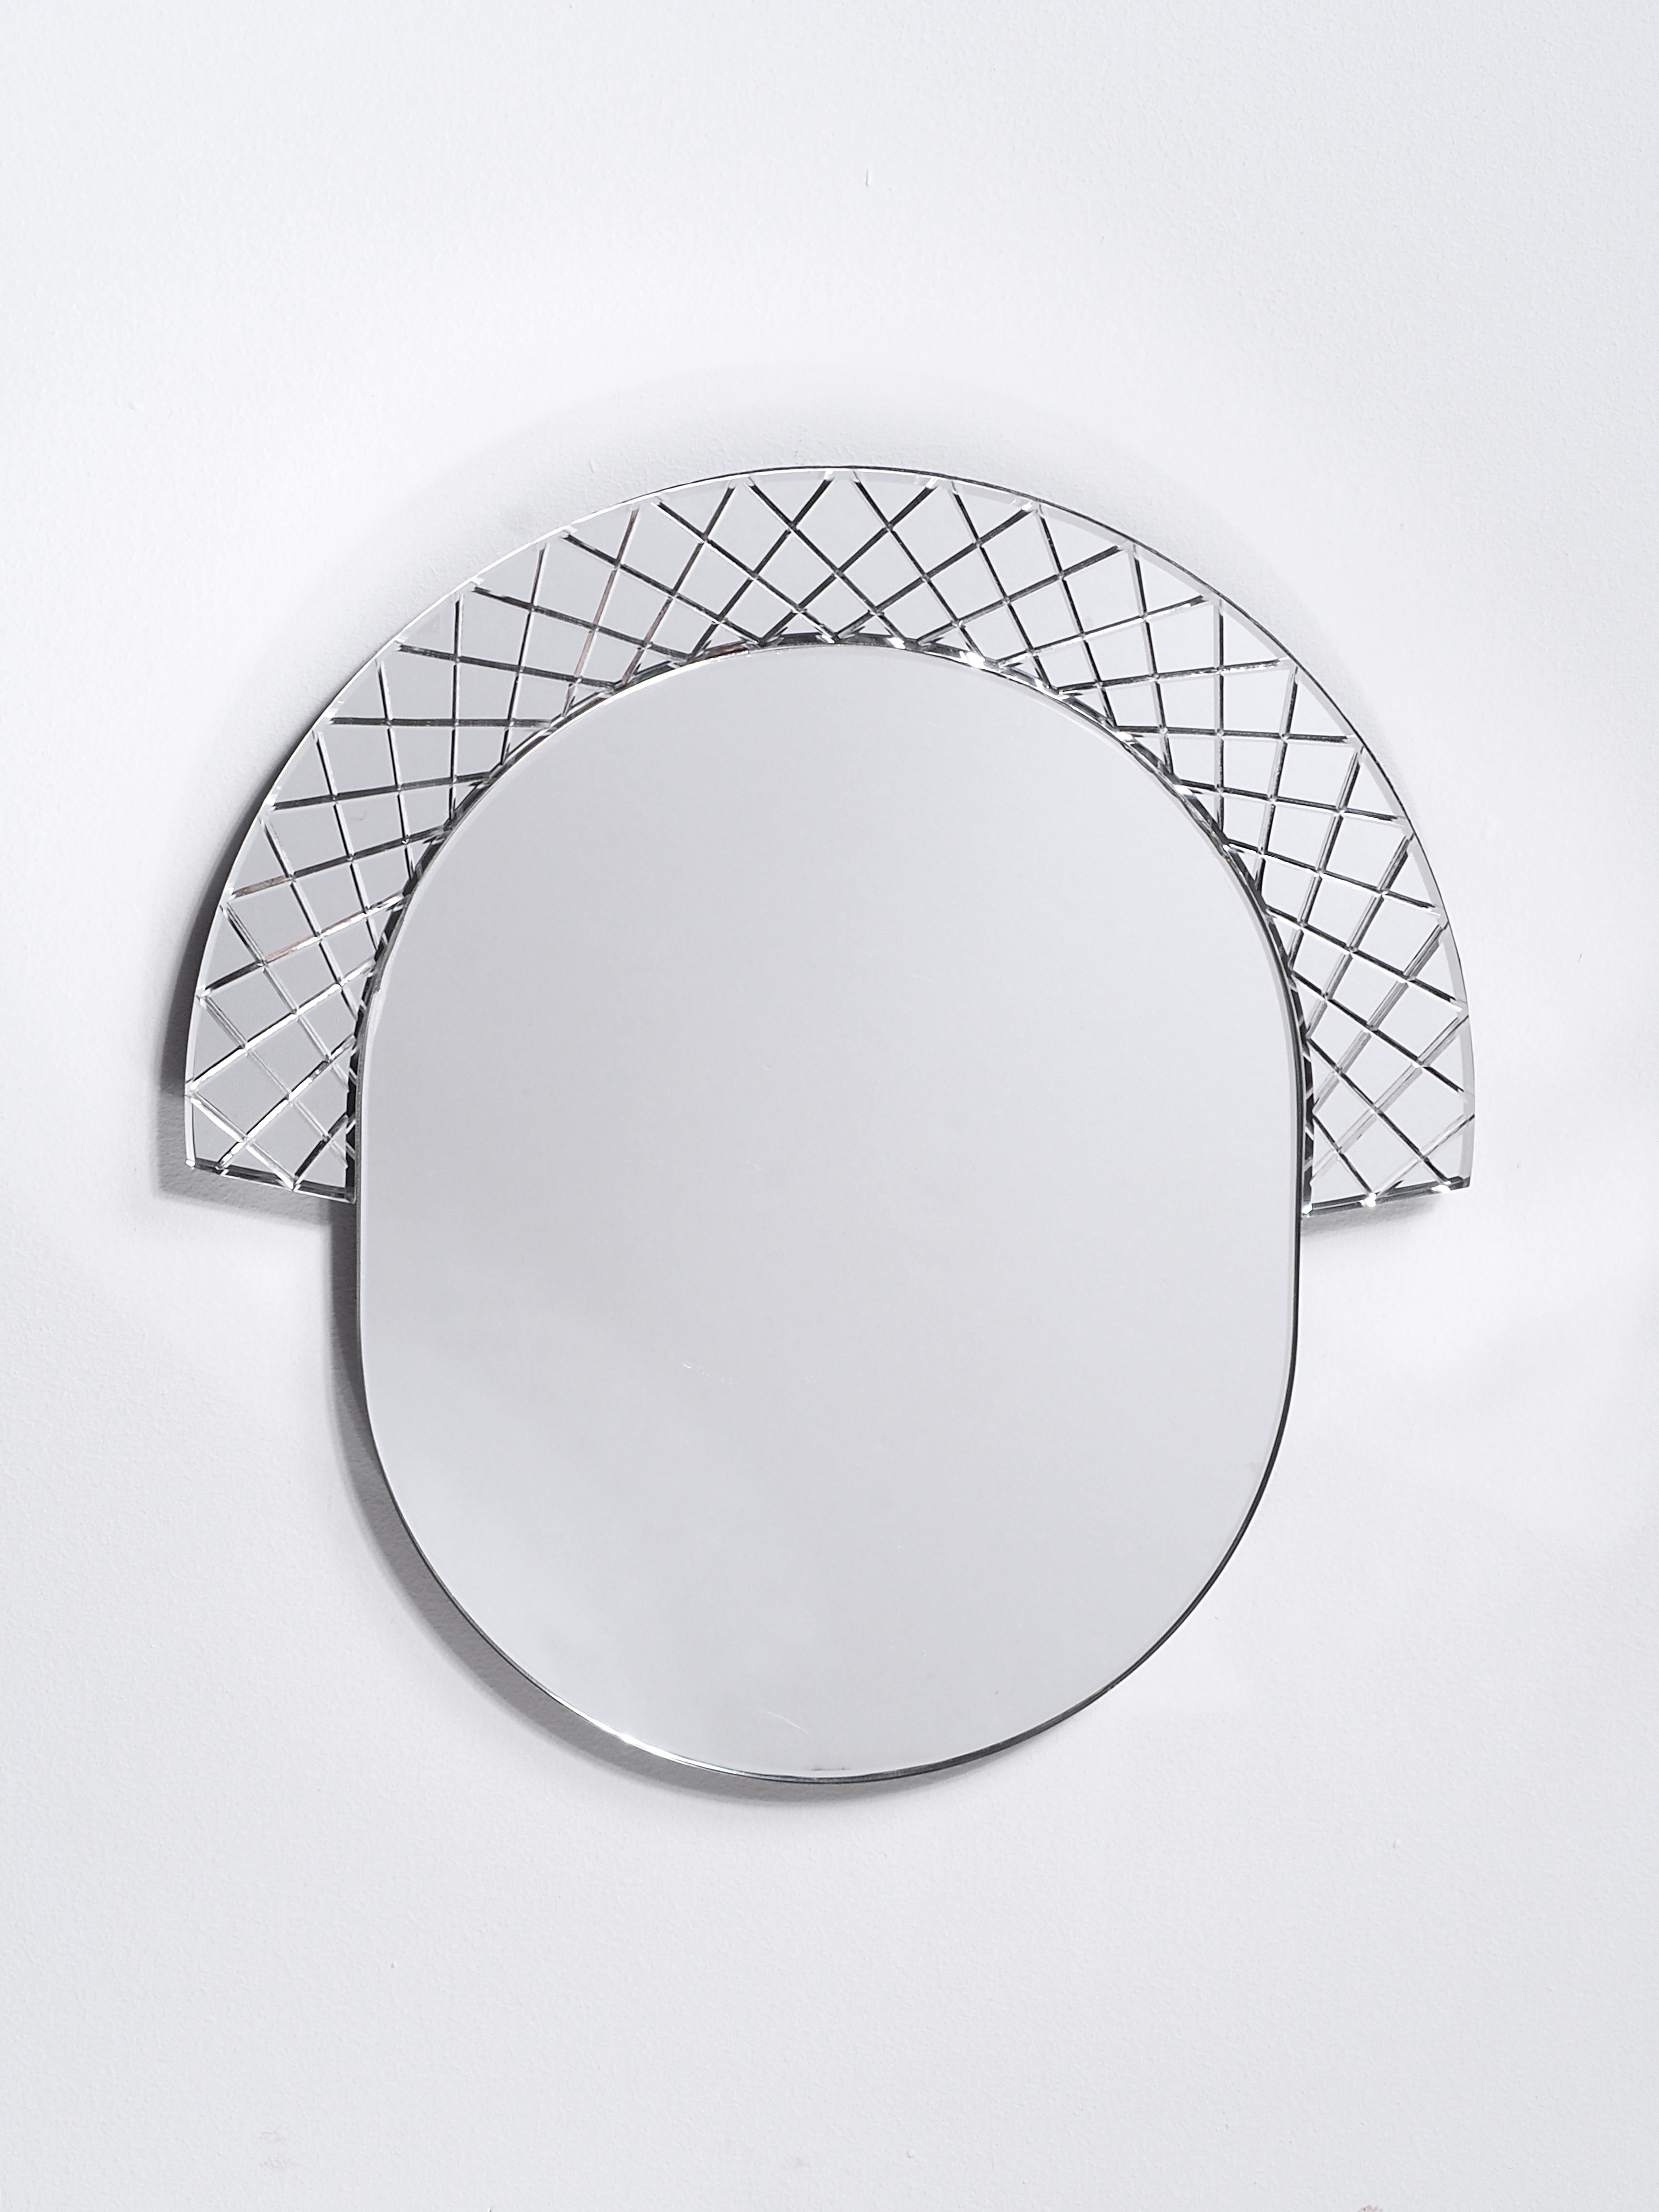 Scena Elemento Uno Murano Mirror by Nikolai Kotlarczyk
Dimensions: D 3 x W 30 x H 30 cm 
Materials: silvered carved glass, dark gray wood back.
Also available in other sizes and designs. Please contact us for more information. 


Elemento is a